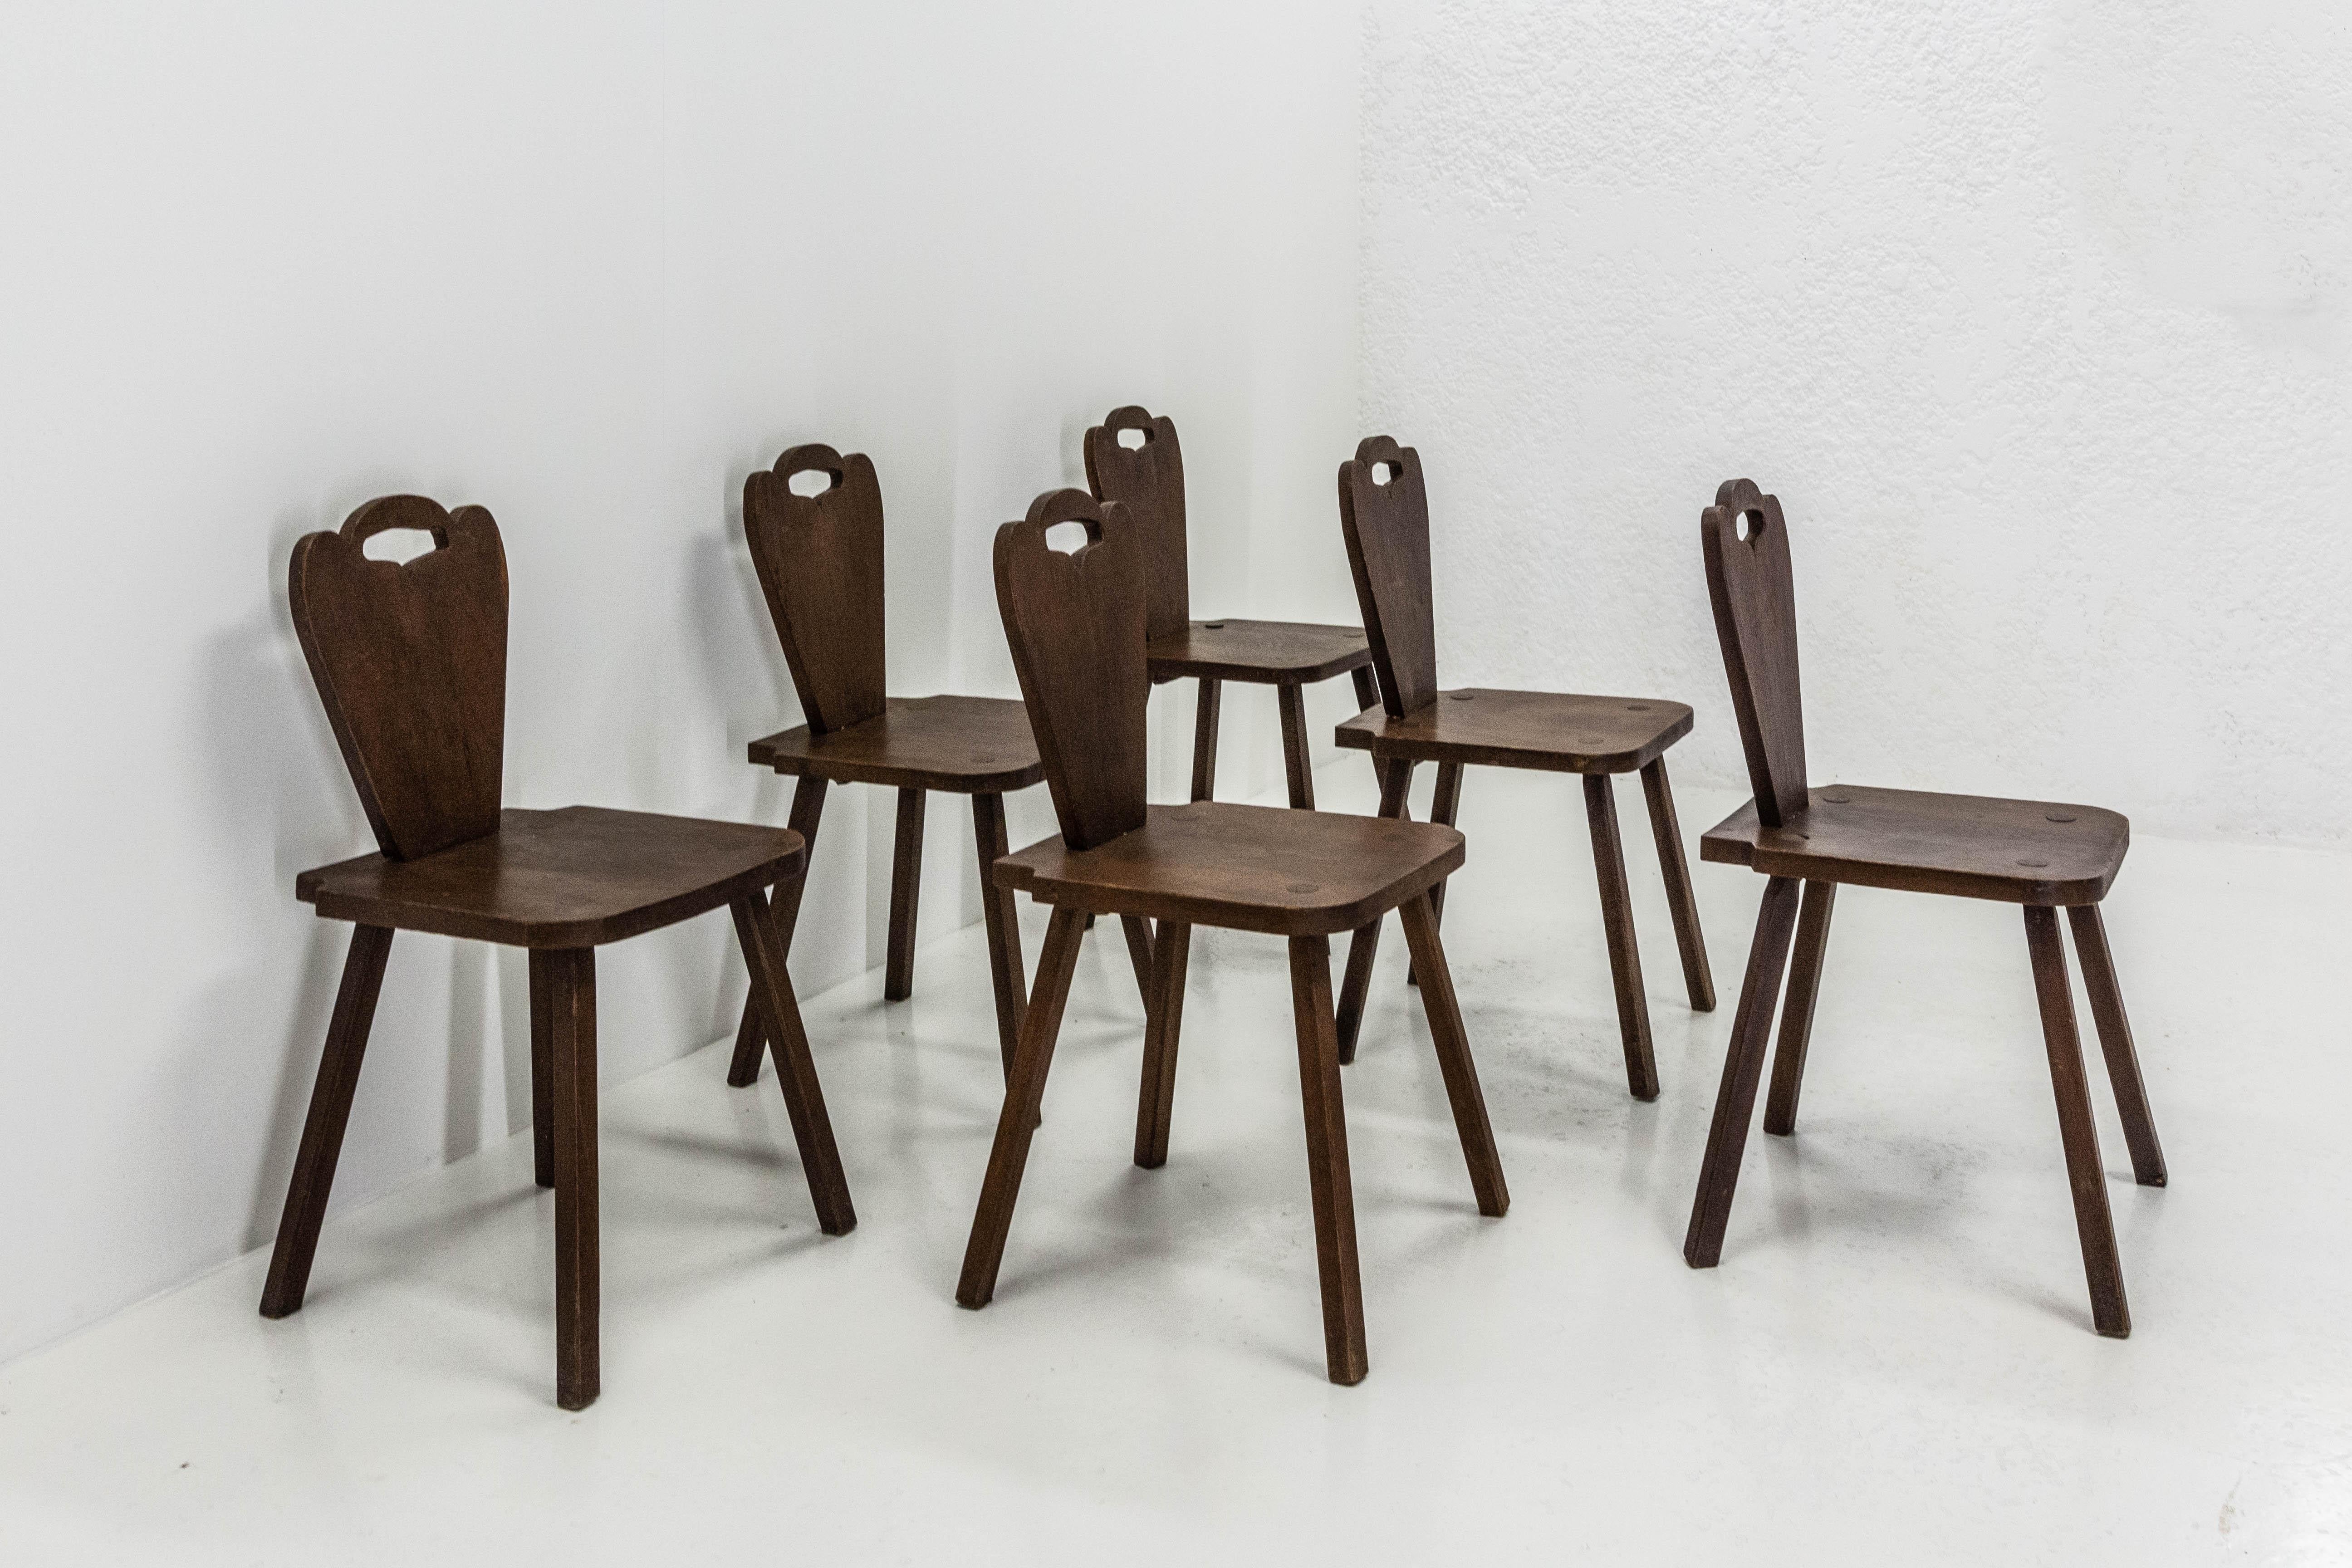 Country Six Dining Chairs Swiss Alp Escabelles Oak Brutalist Style, French 1950